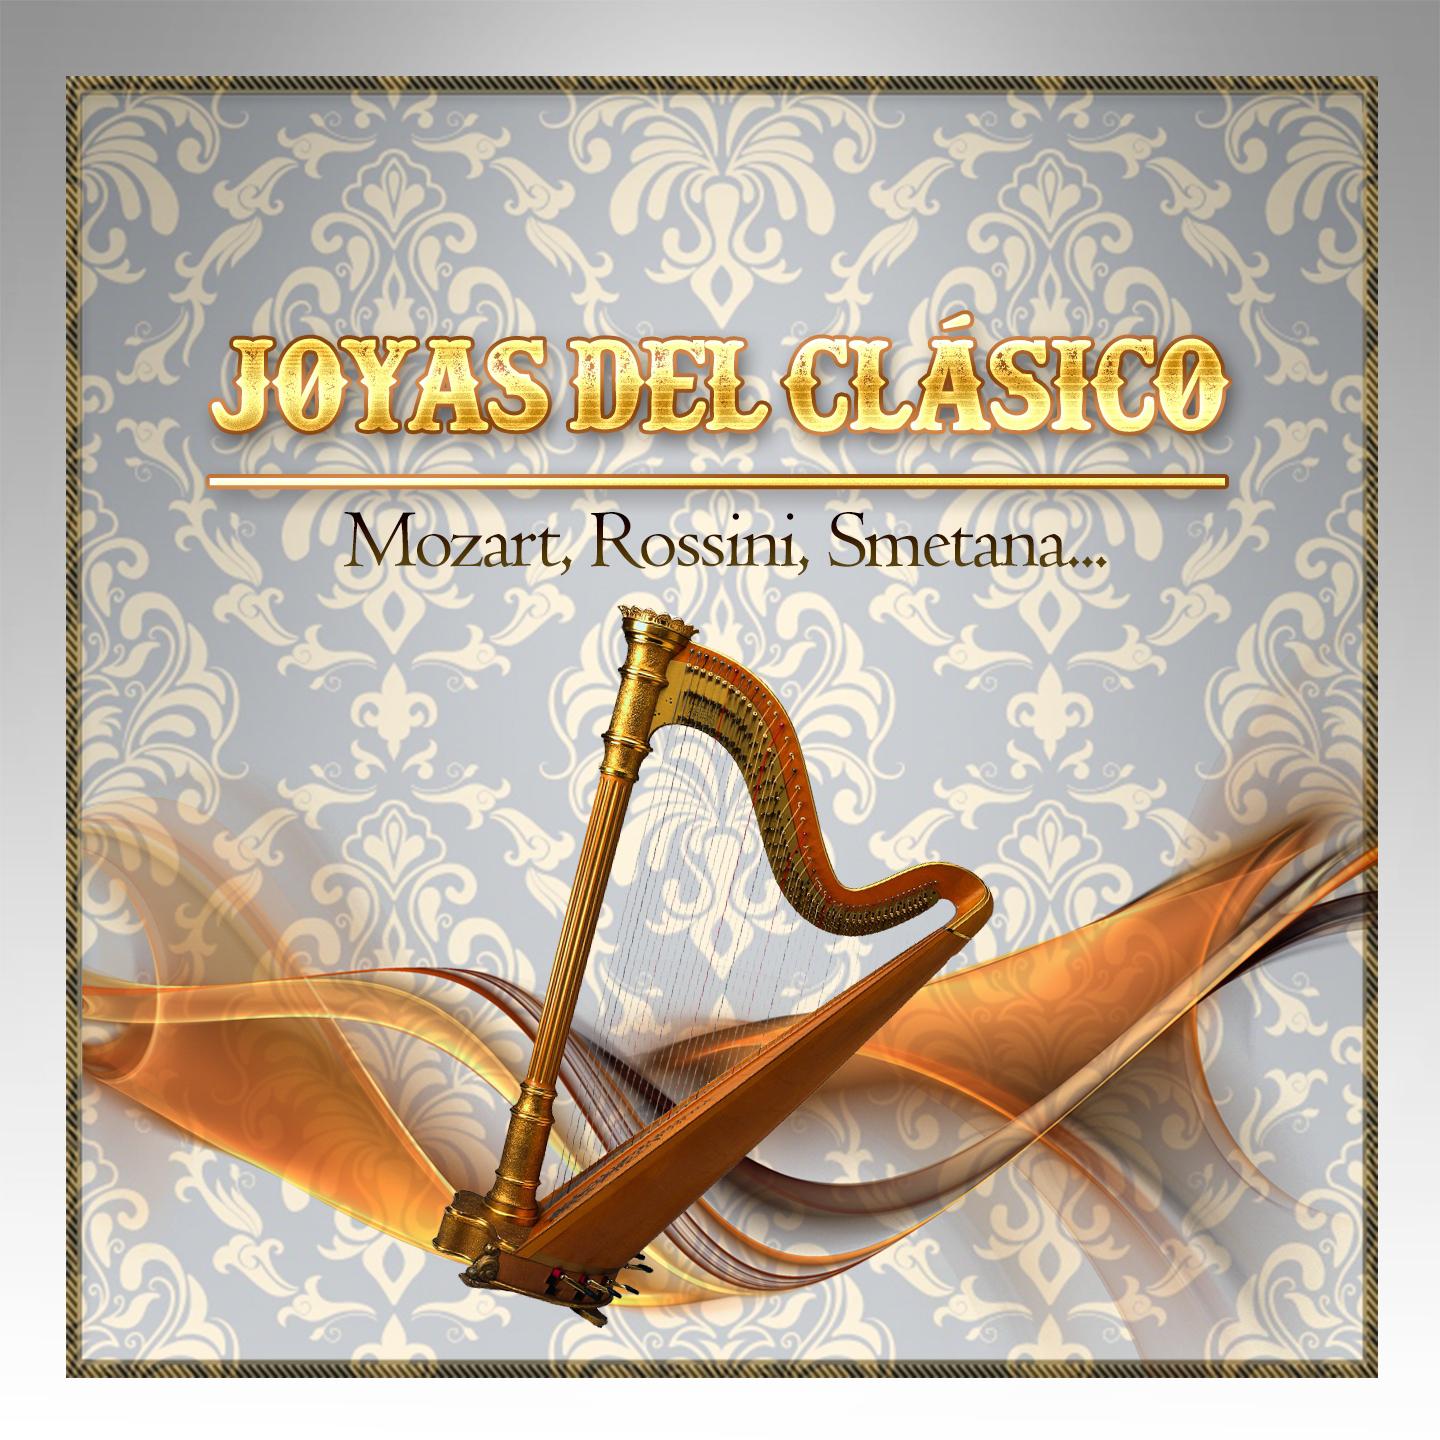 The Seasons in D Major, Op. 37a: II. February: The Carnival Allegro giusto